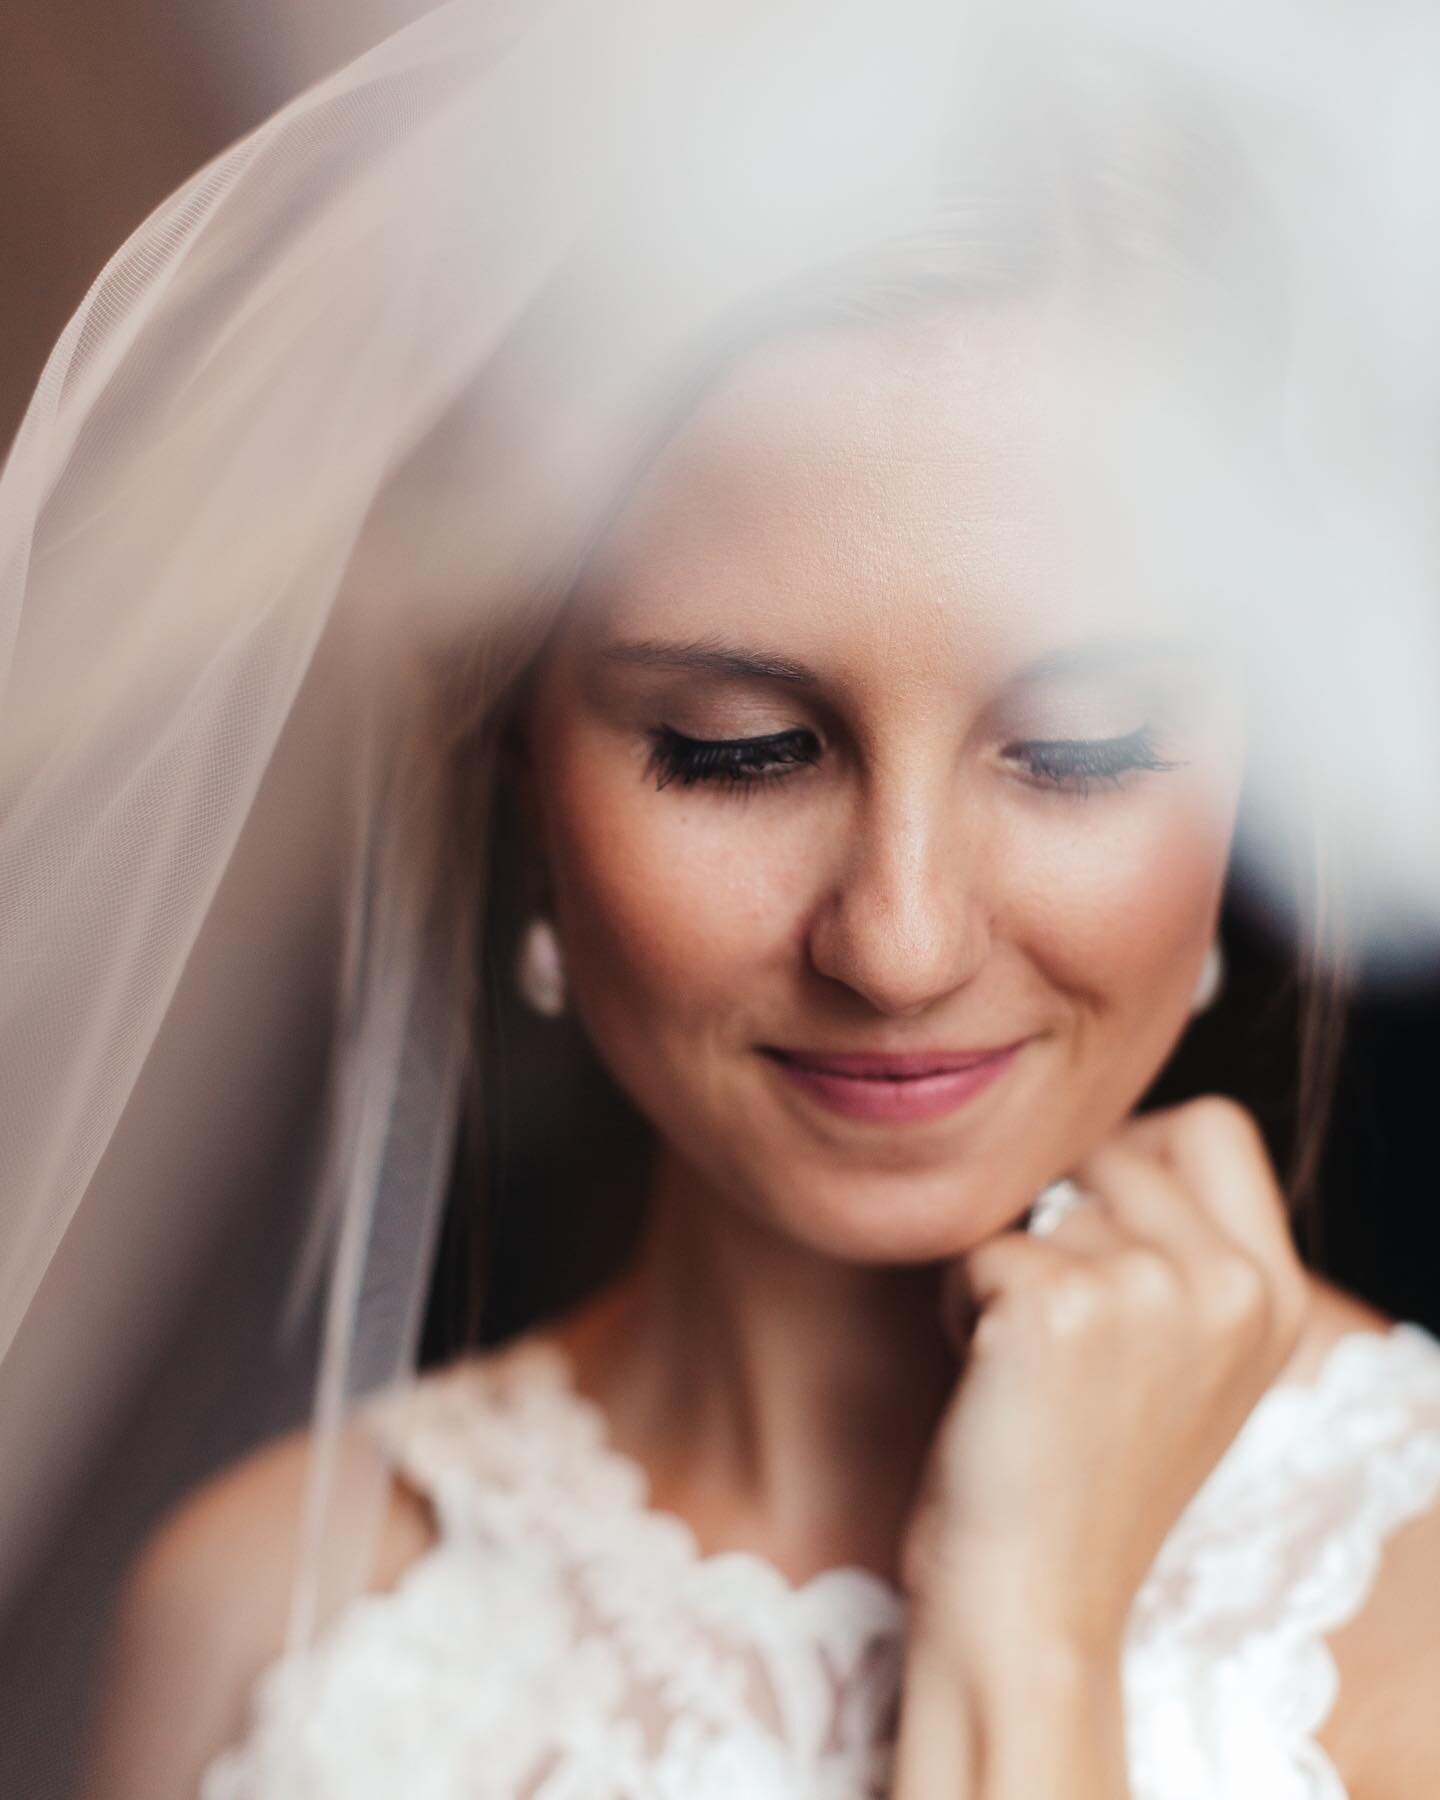 Kelly / we took her bridals at the capitol in May of 2018 and I remember it was during a torrential Texas sized downpour. She made everything effortless by being SO photogenic and easy-going :)